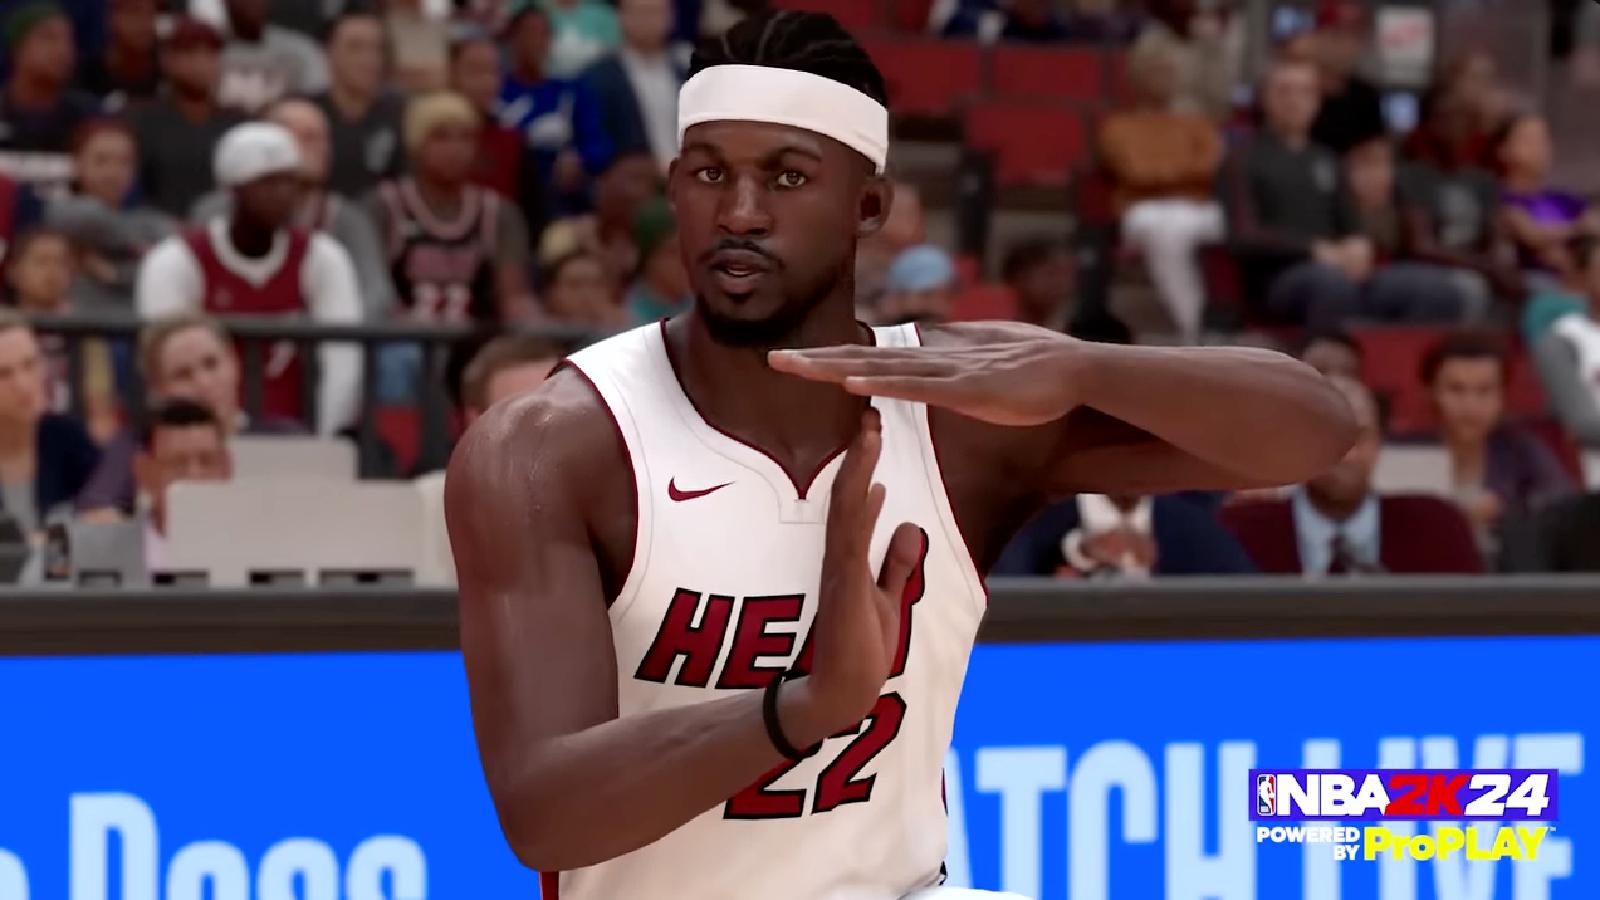 NBA 2K24 is already the second-worst reviewed game on Steam